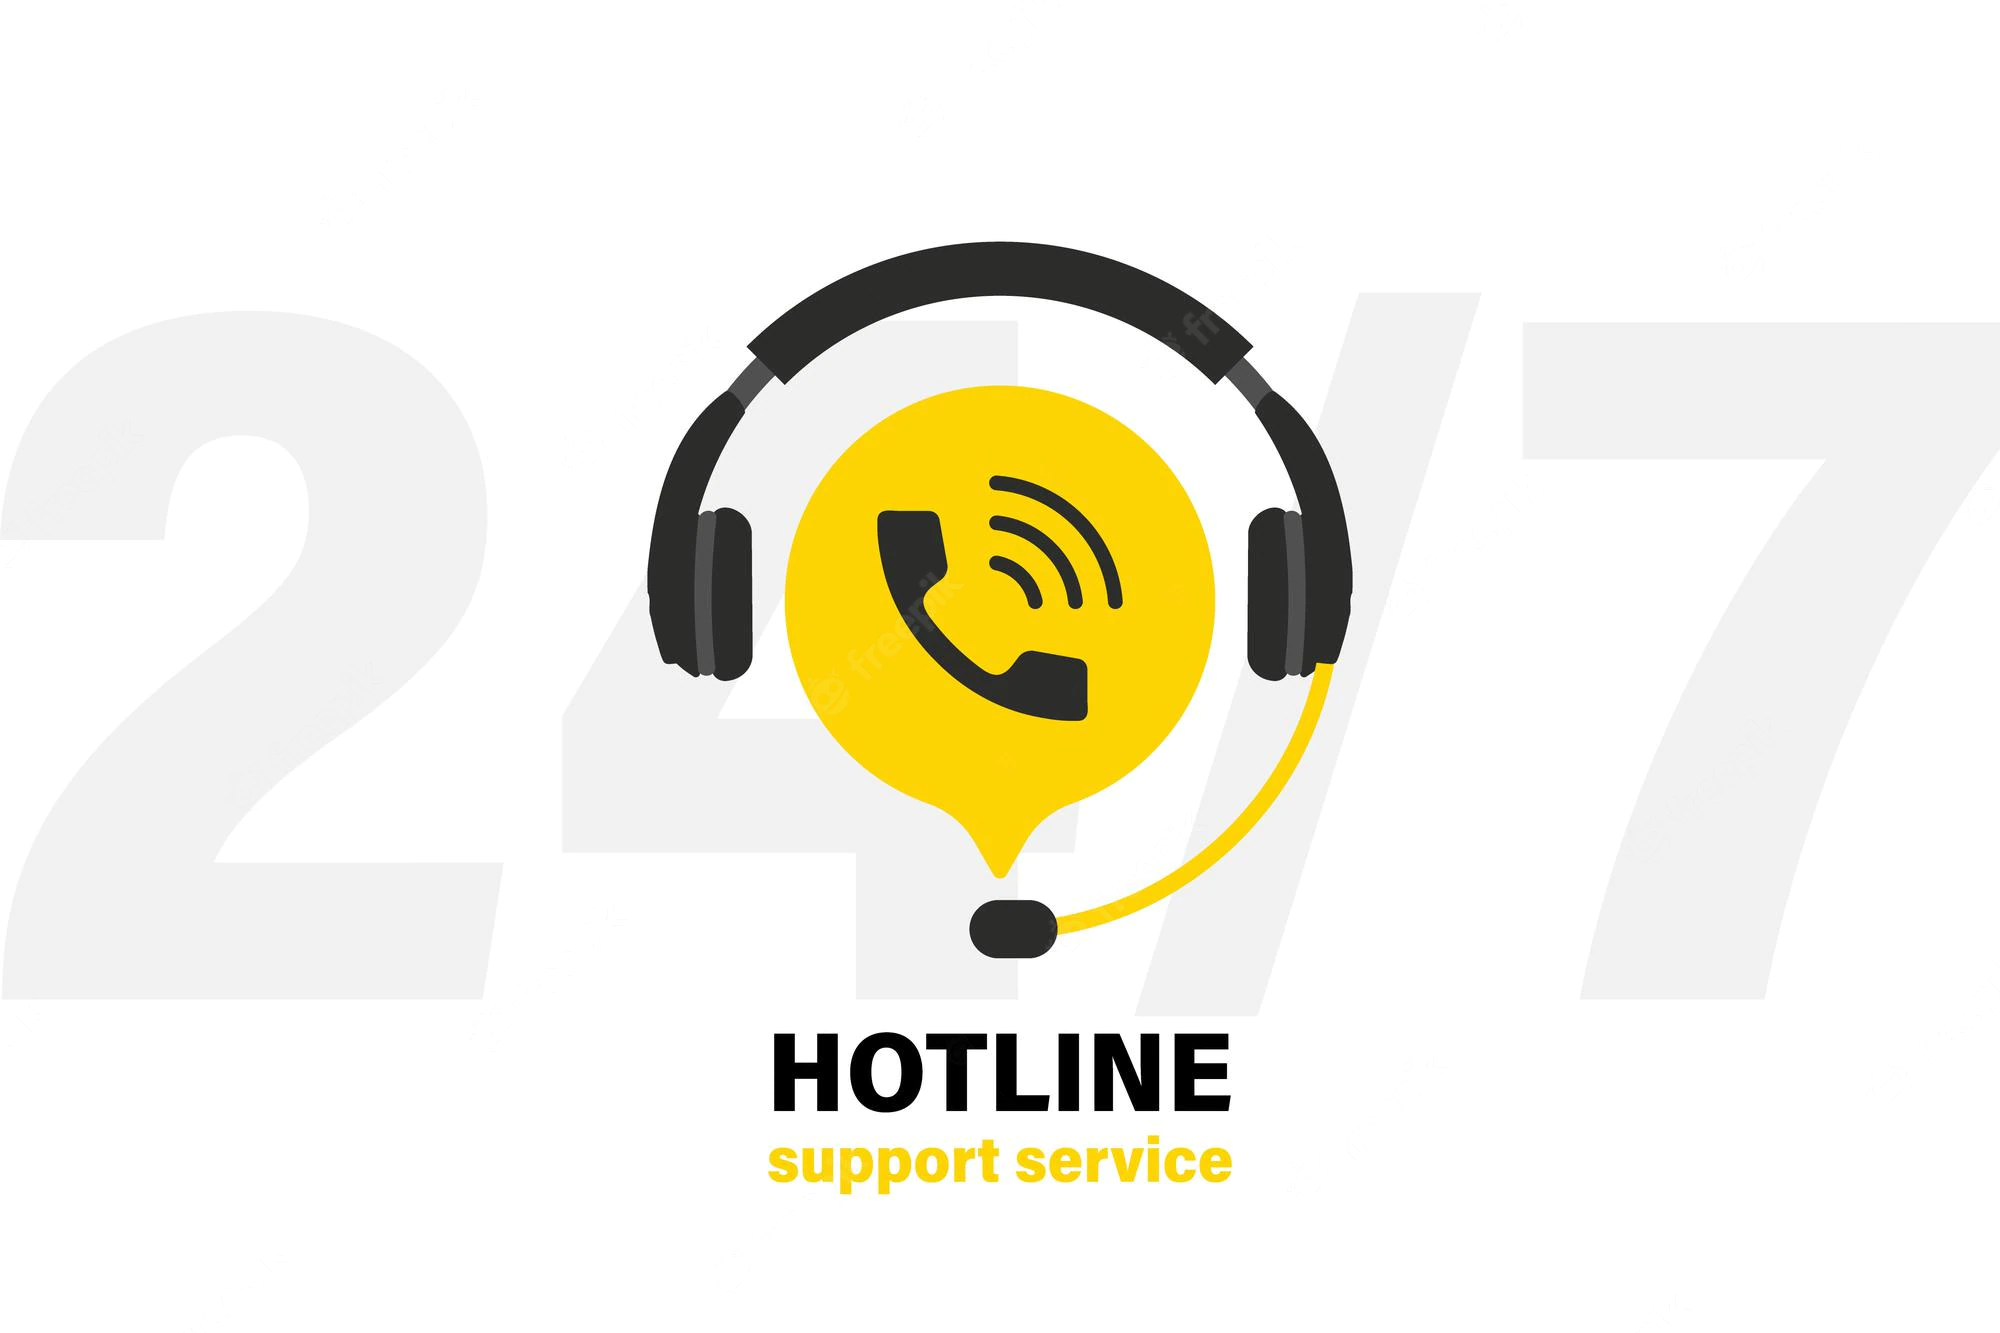 tech-support-headphones-with-microphone-chat-speech-bubble-support-service-user-consultation-customer-support-icon-operator-secretary-call-center-24-7-hotline-support-service_435184-192